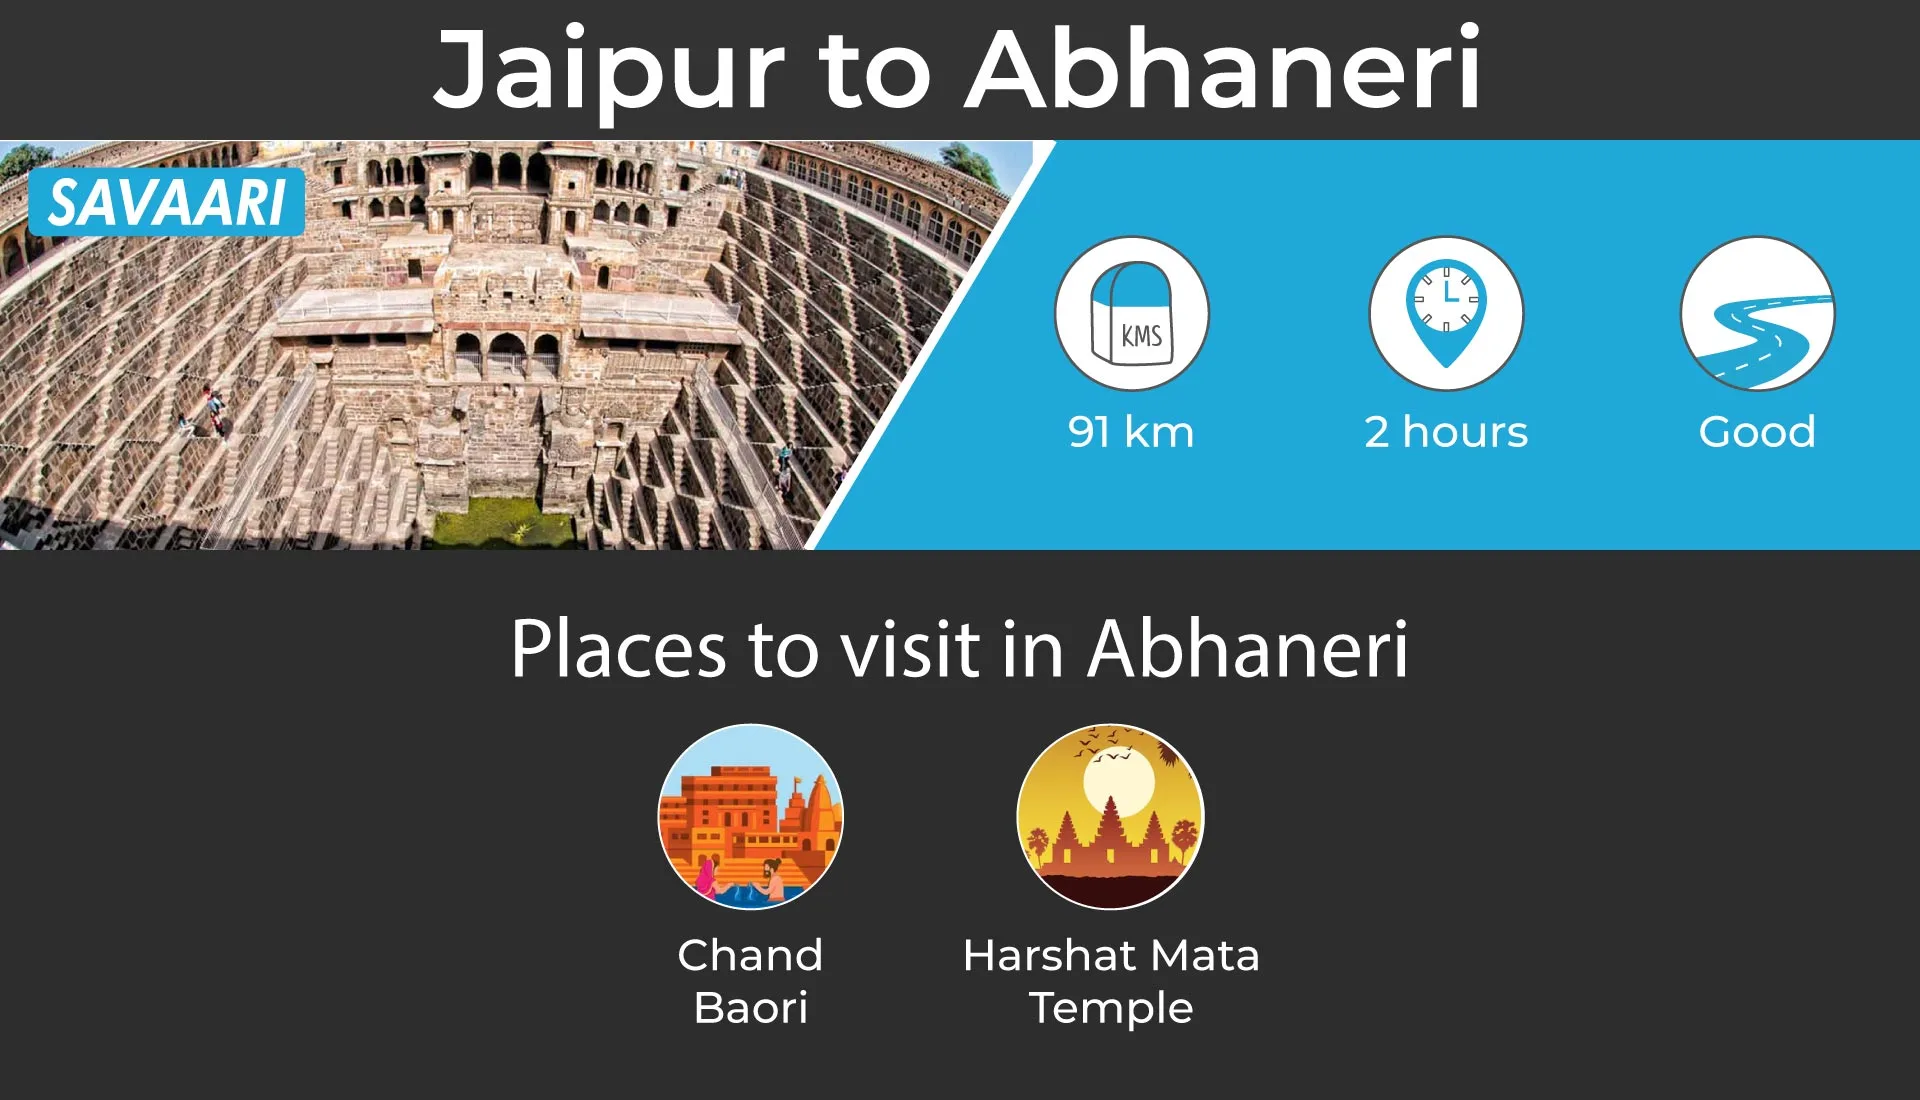 Places to visit by road near Jaipur, Abhaneri